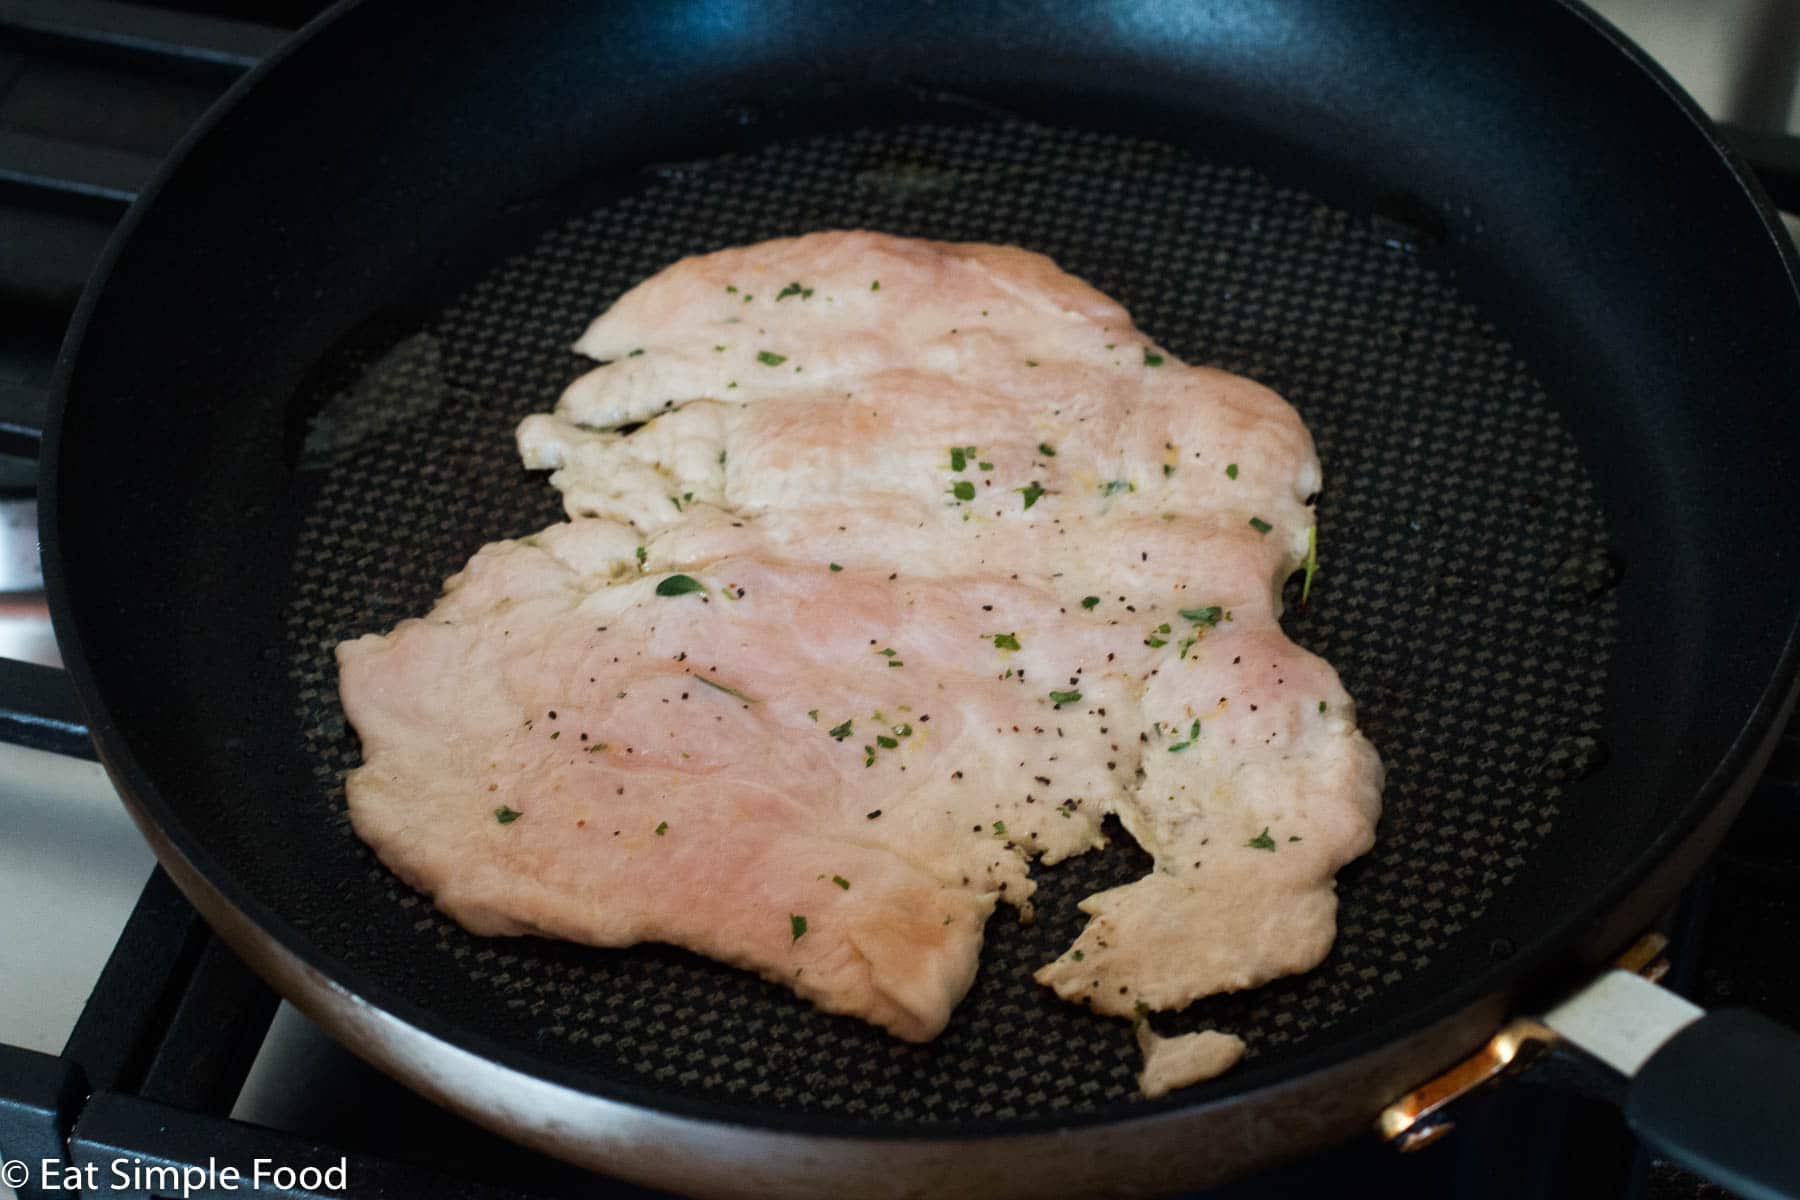 Raw flattened chicken breast cooking in a black skillet. Side view.